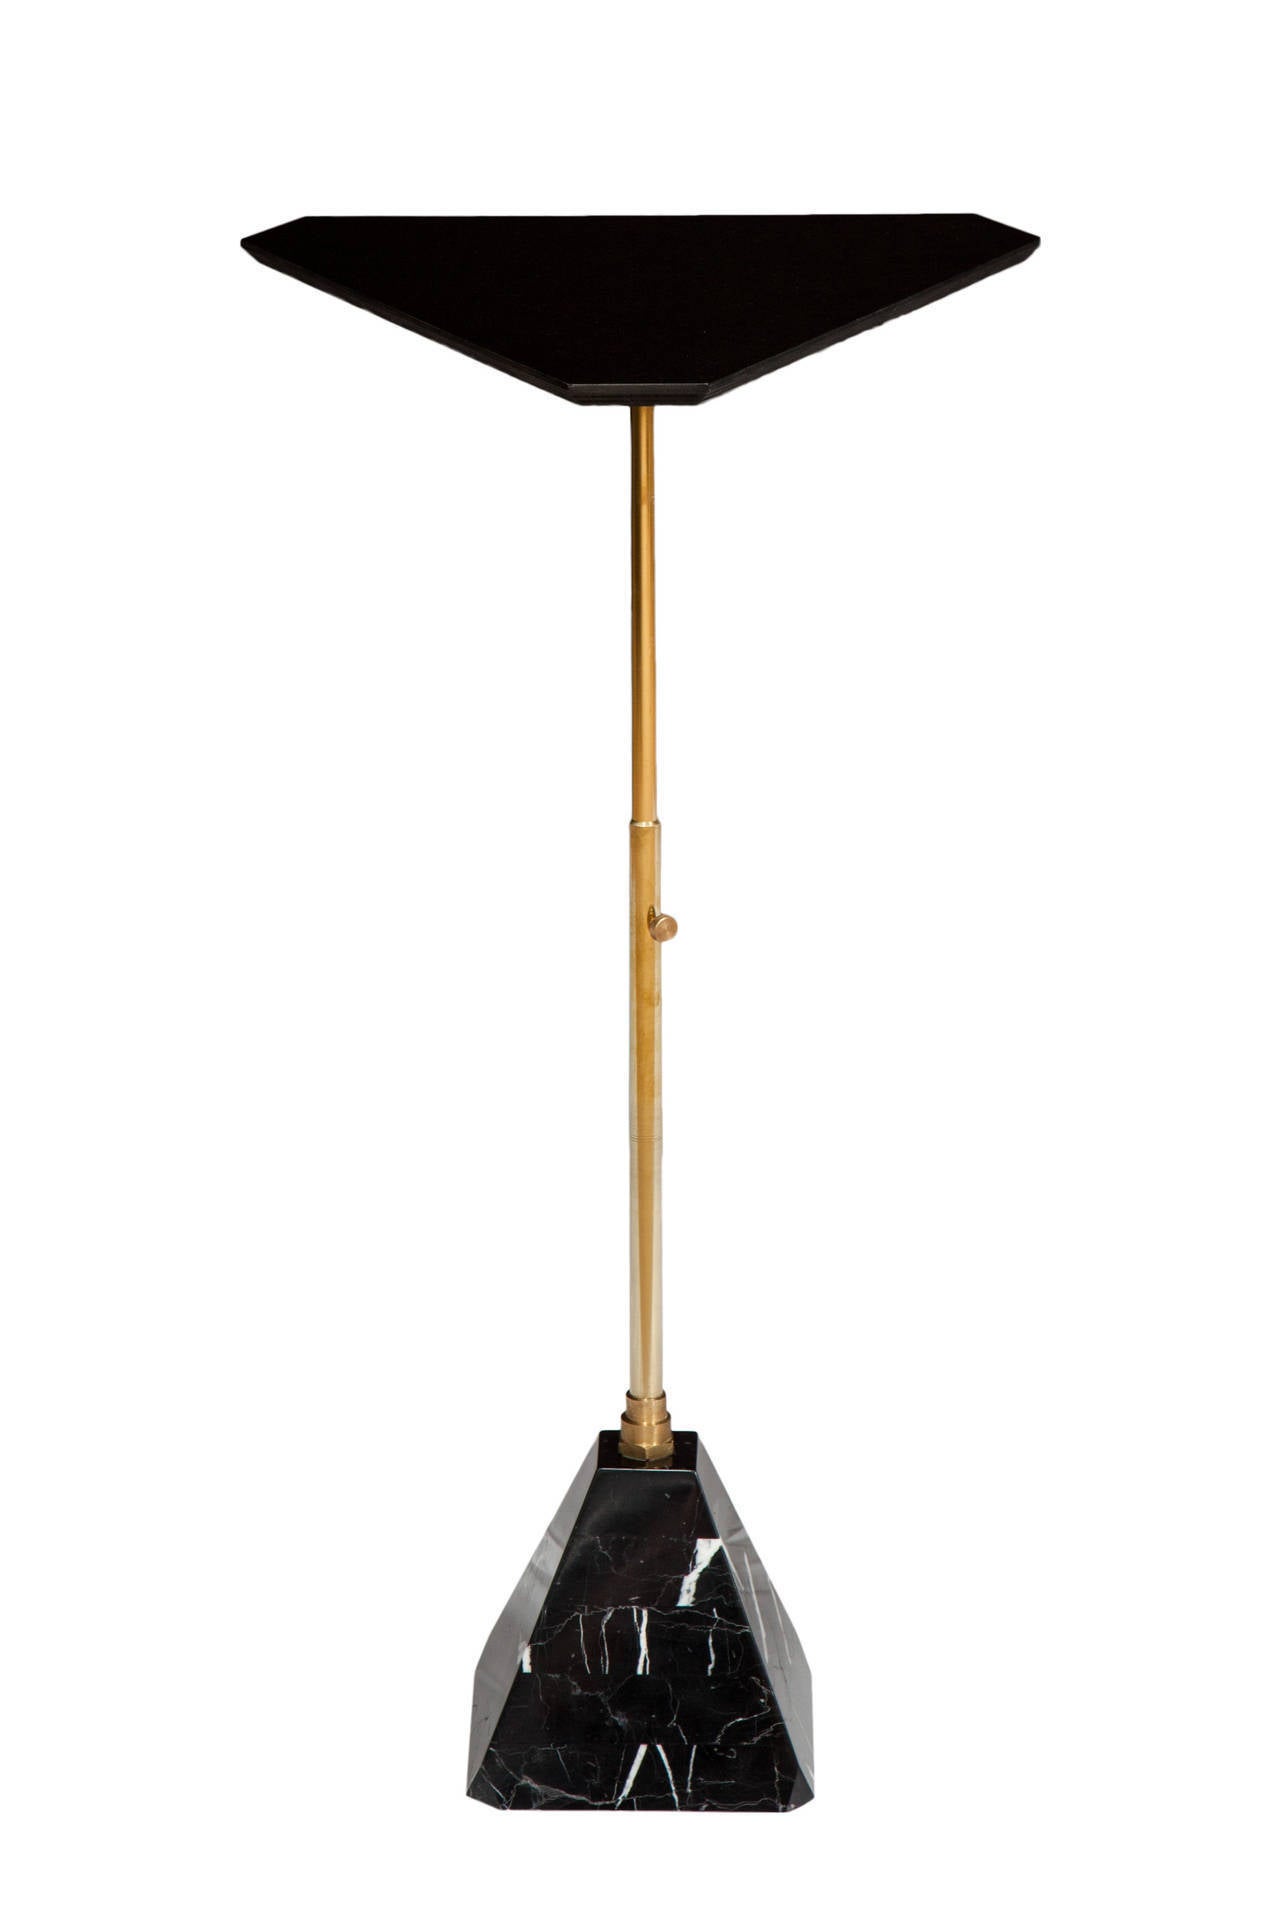 Contemporary Erickson Aesthetics  Pyramid Base Cocktail Table with Telescoping Swivel Post For Sale